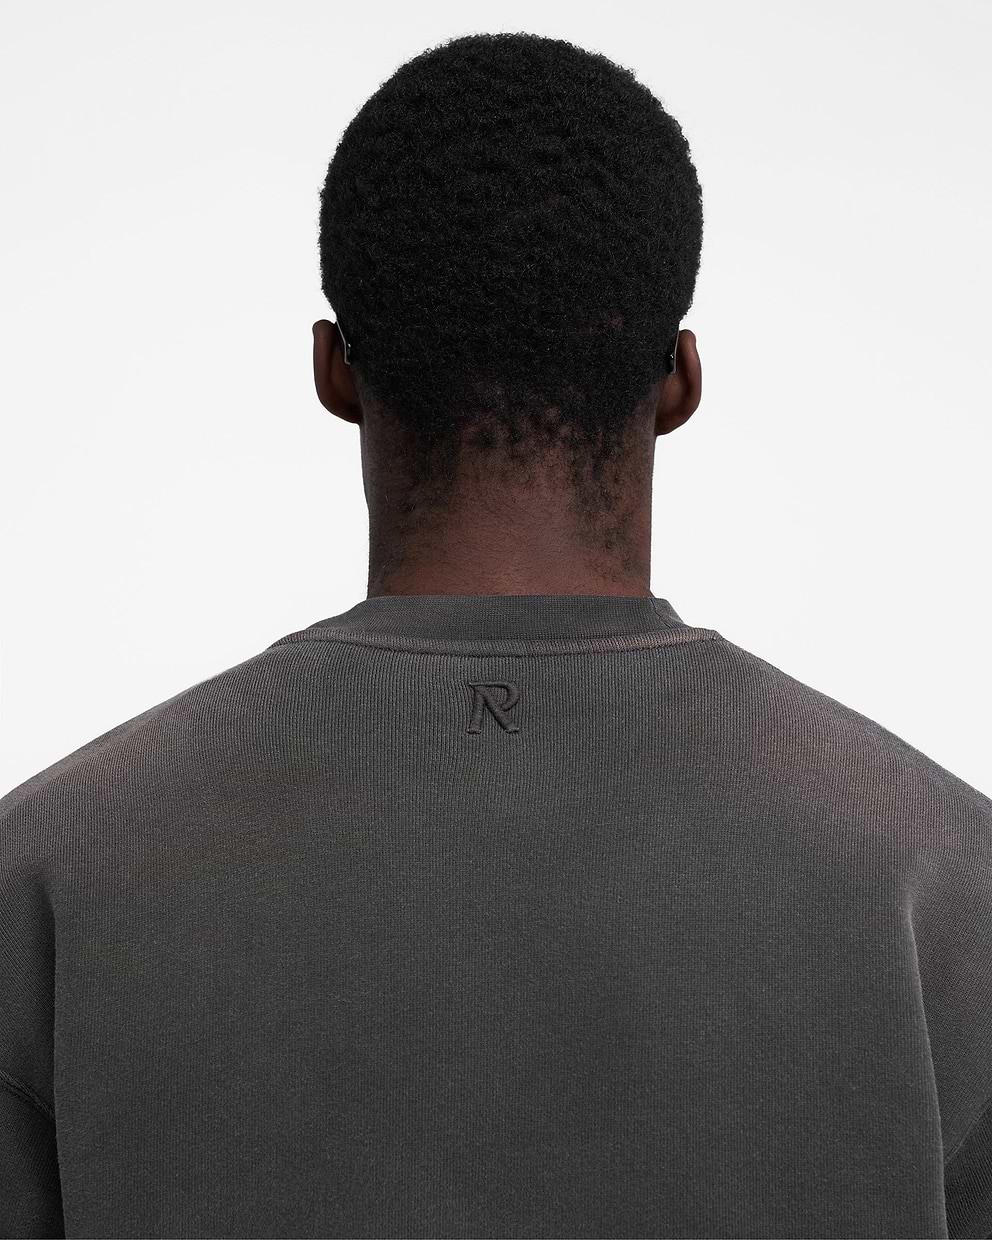 Heavyweight Initial Sweater - Stained Black